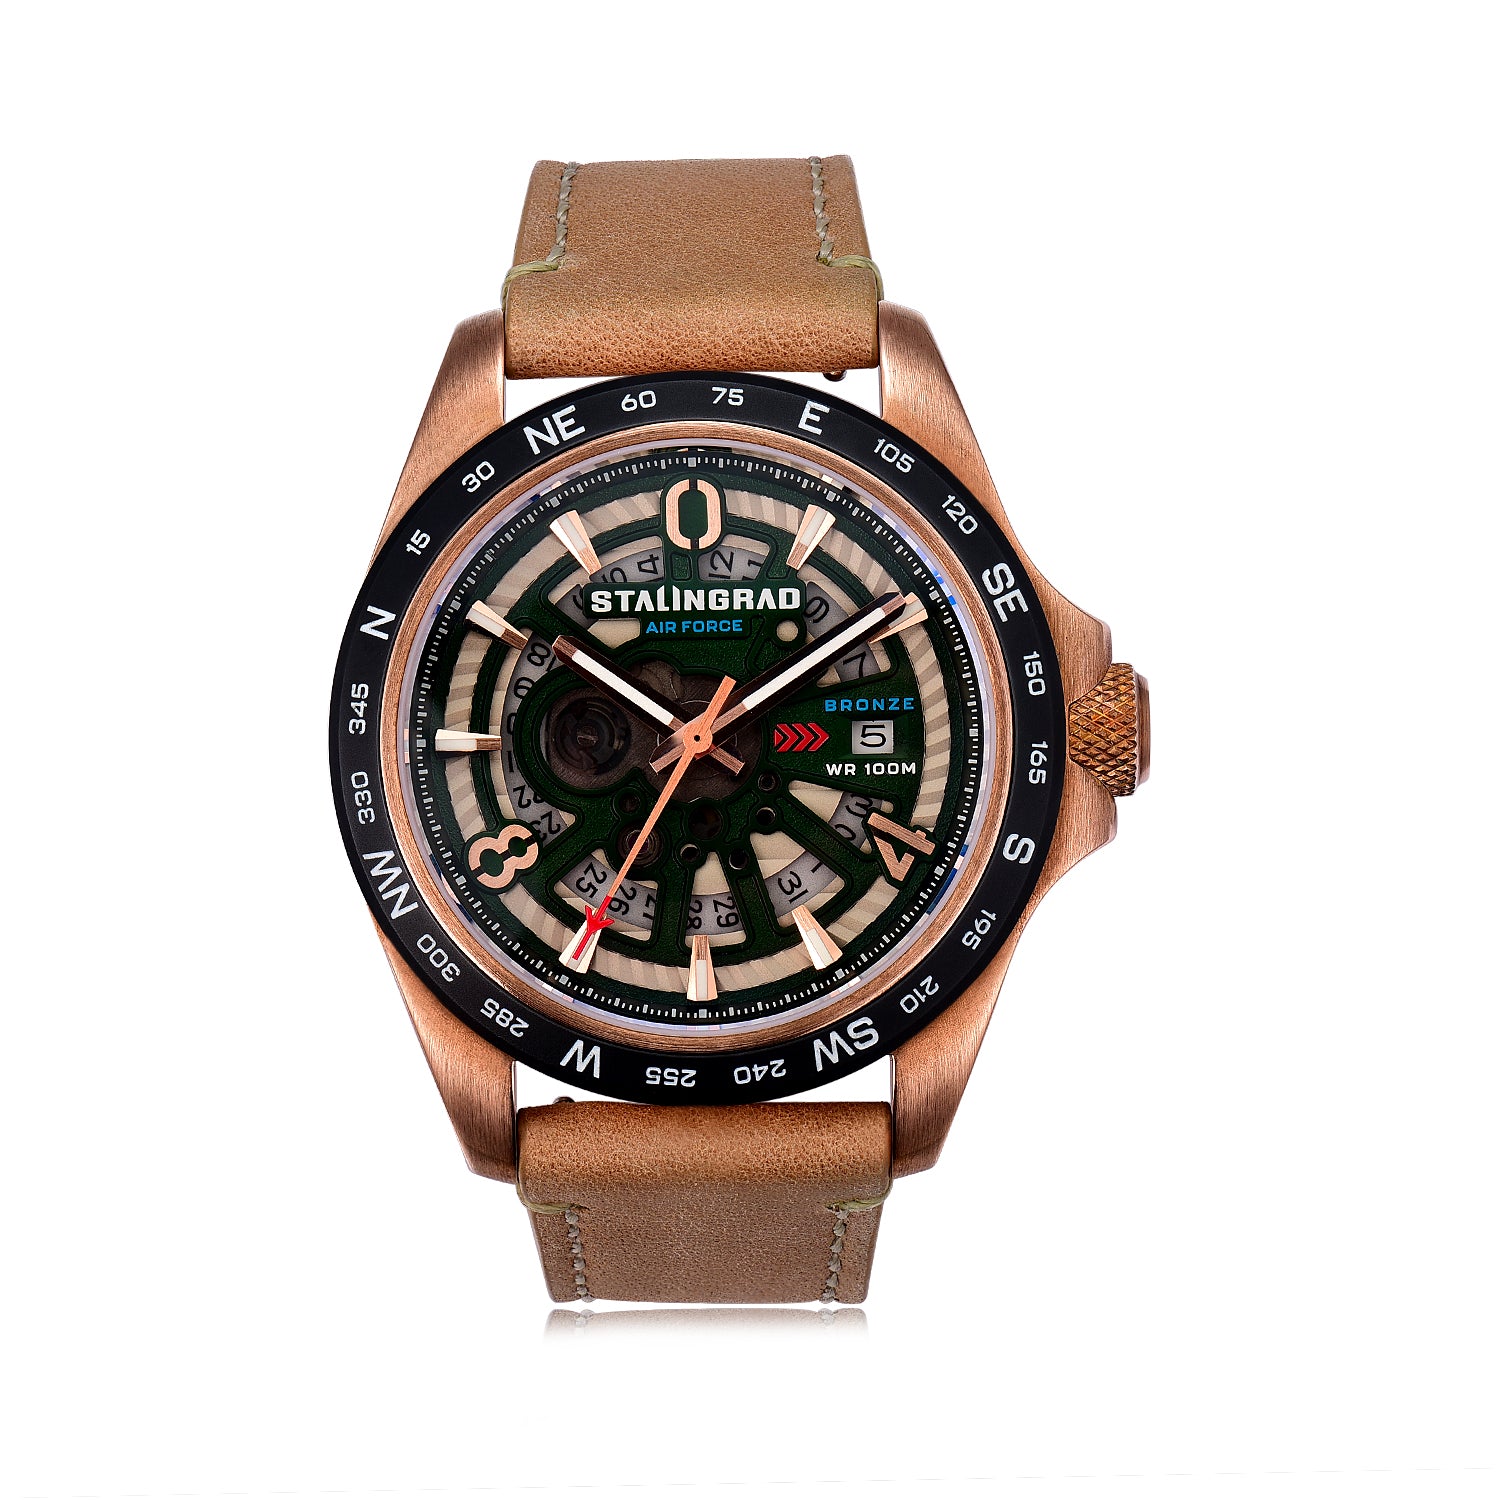 Stalingrad Mikoyan Watch Bronze Case  with a Green dial, a compass Bezel and a seethrough dial to the date window with a tan leather strap on a white background